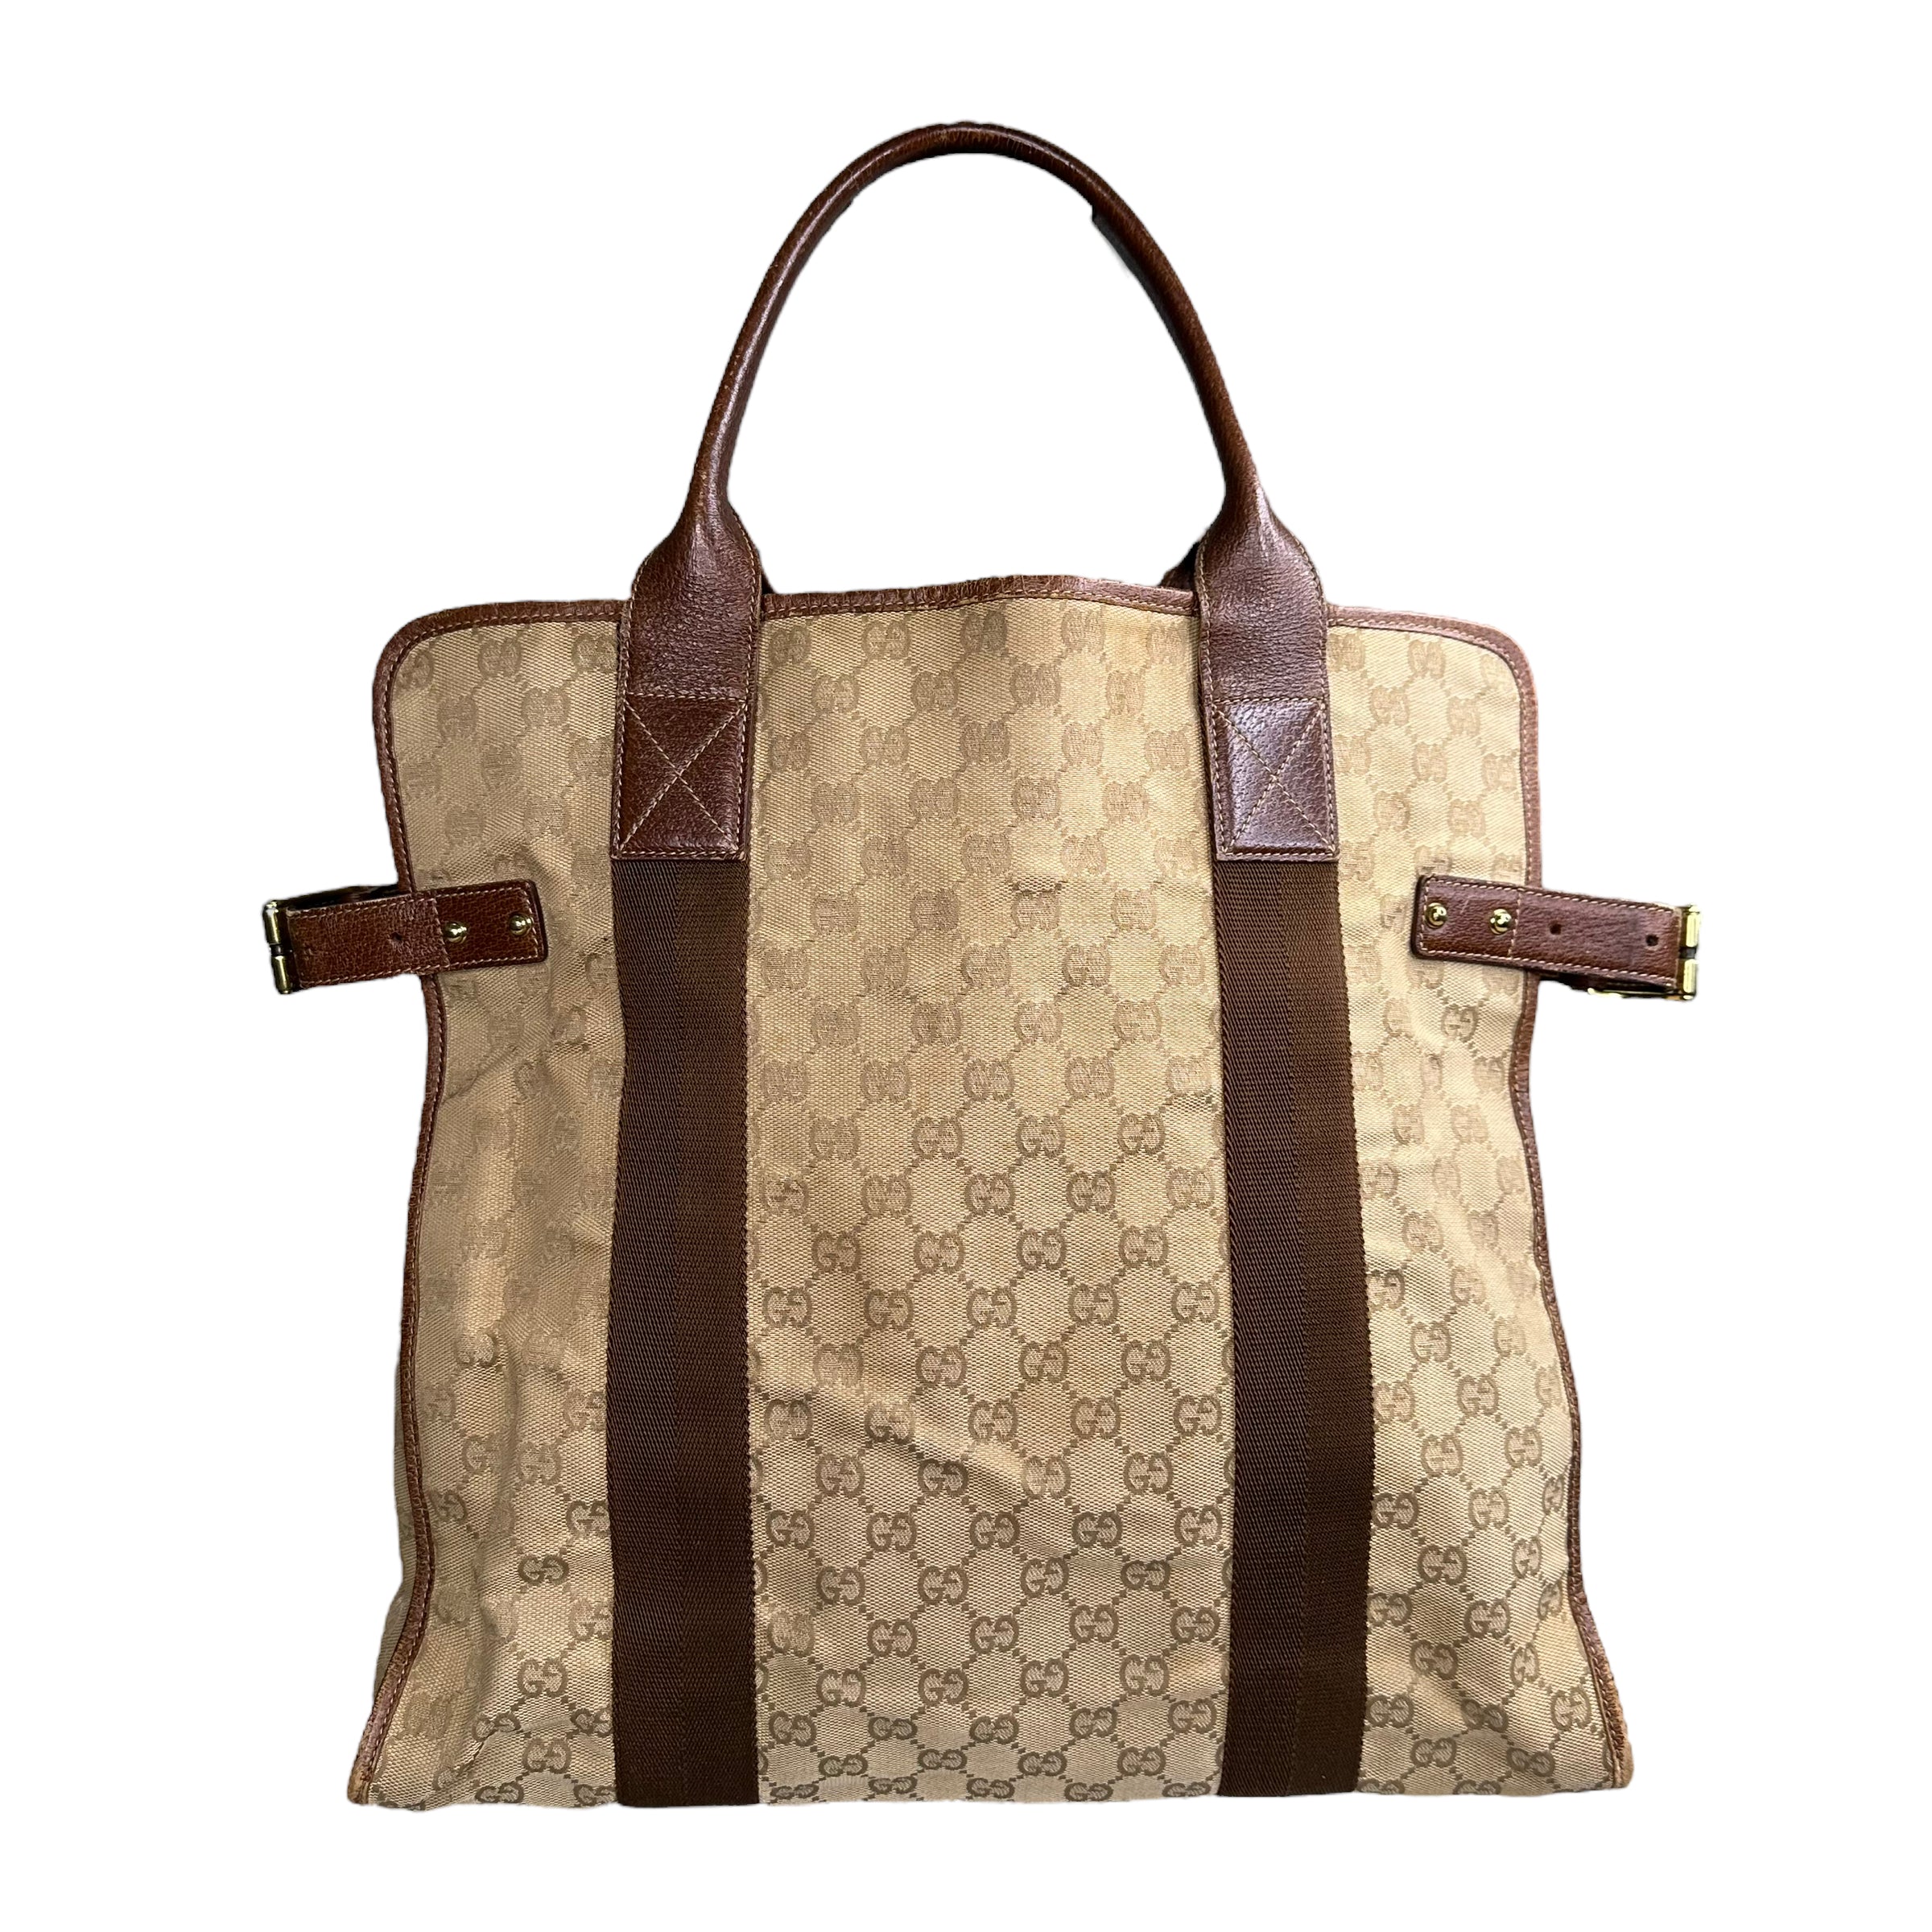 GUCCI GG CANVAS TOTE BAG W/SIDE BUCKLES